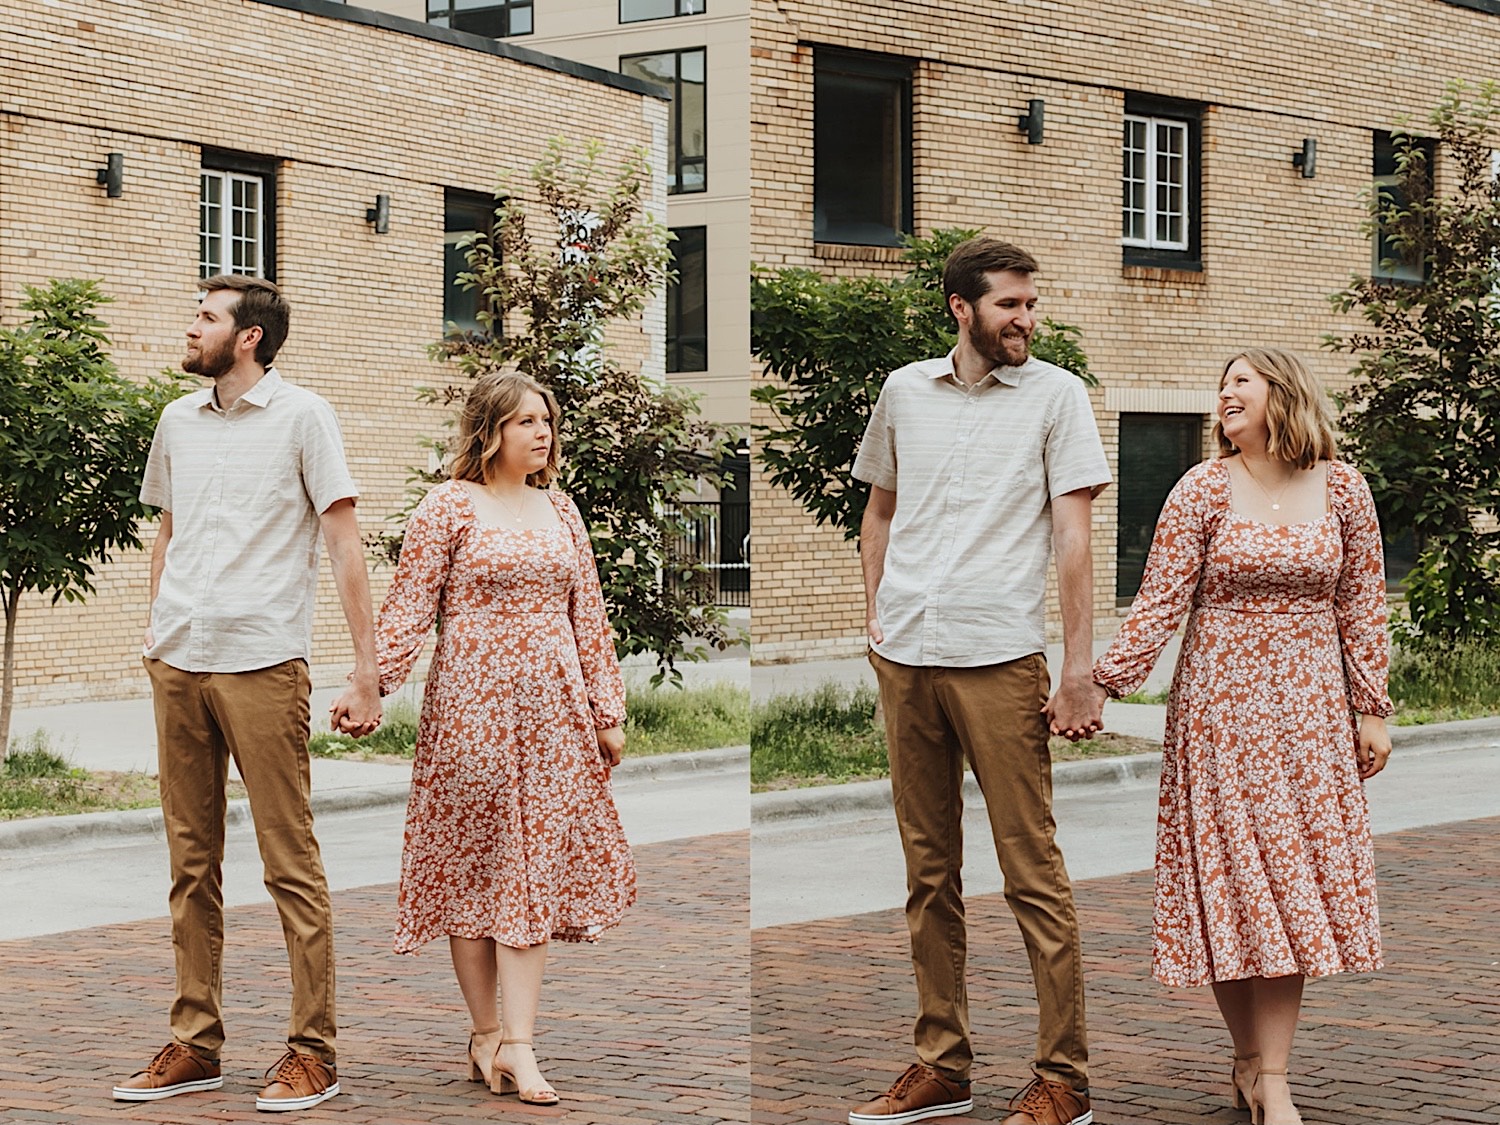 2 photos side by side of a couple holding hands and facing in opposite directions from one another while in front of a brick building